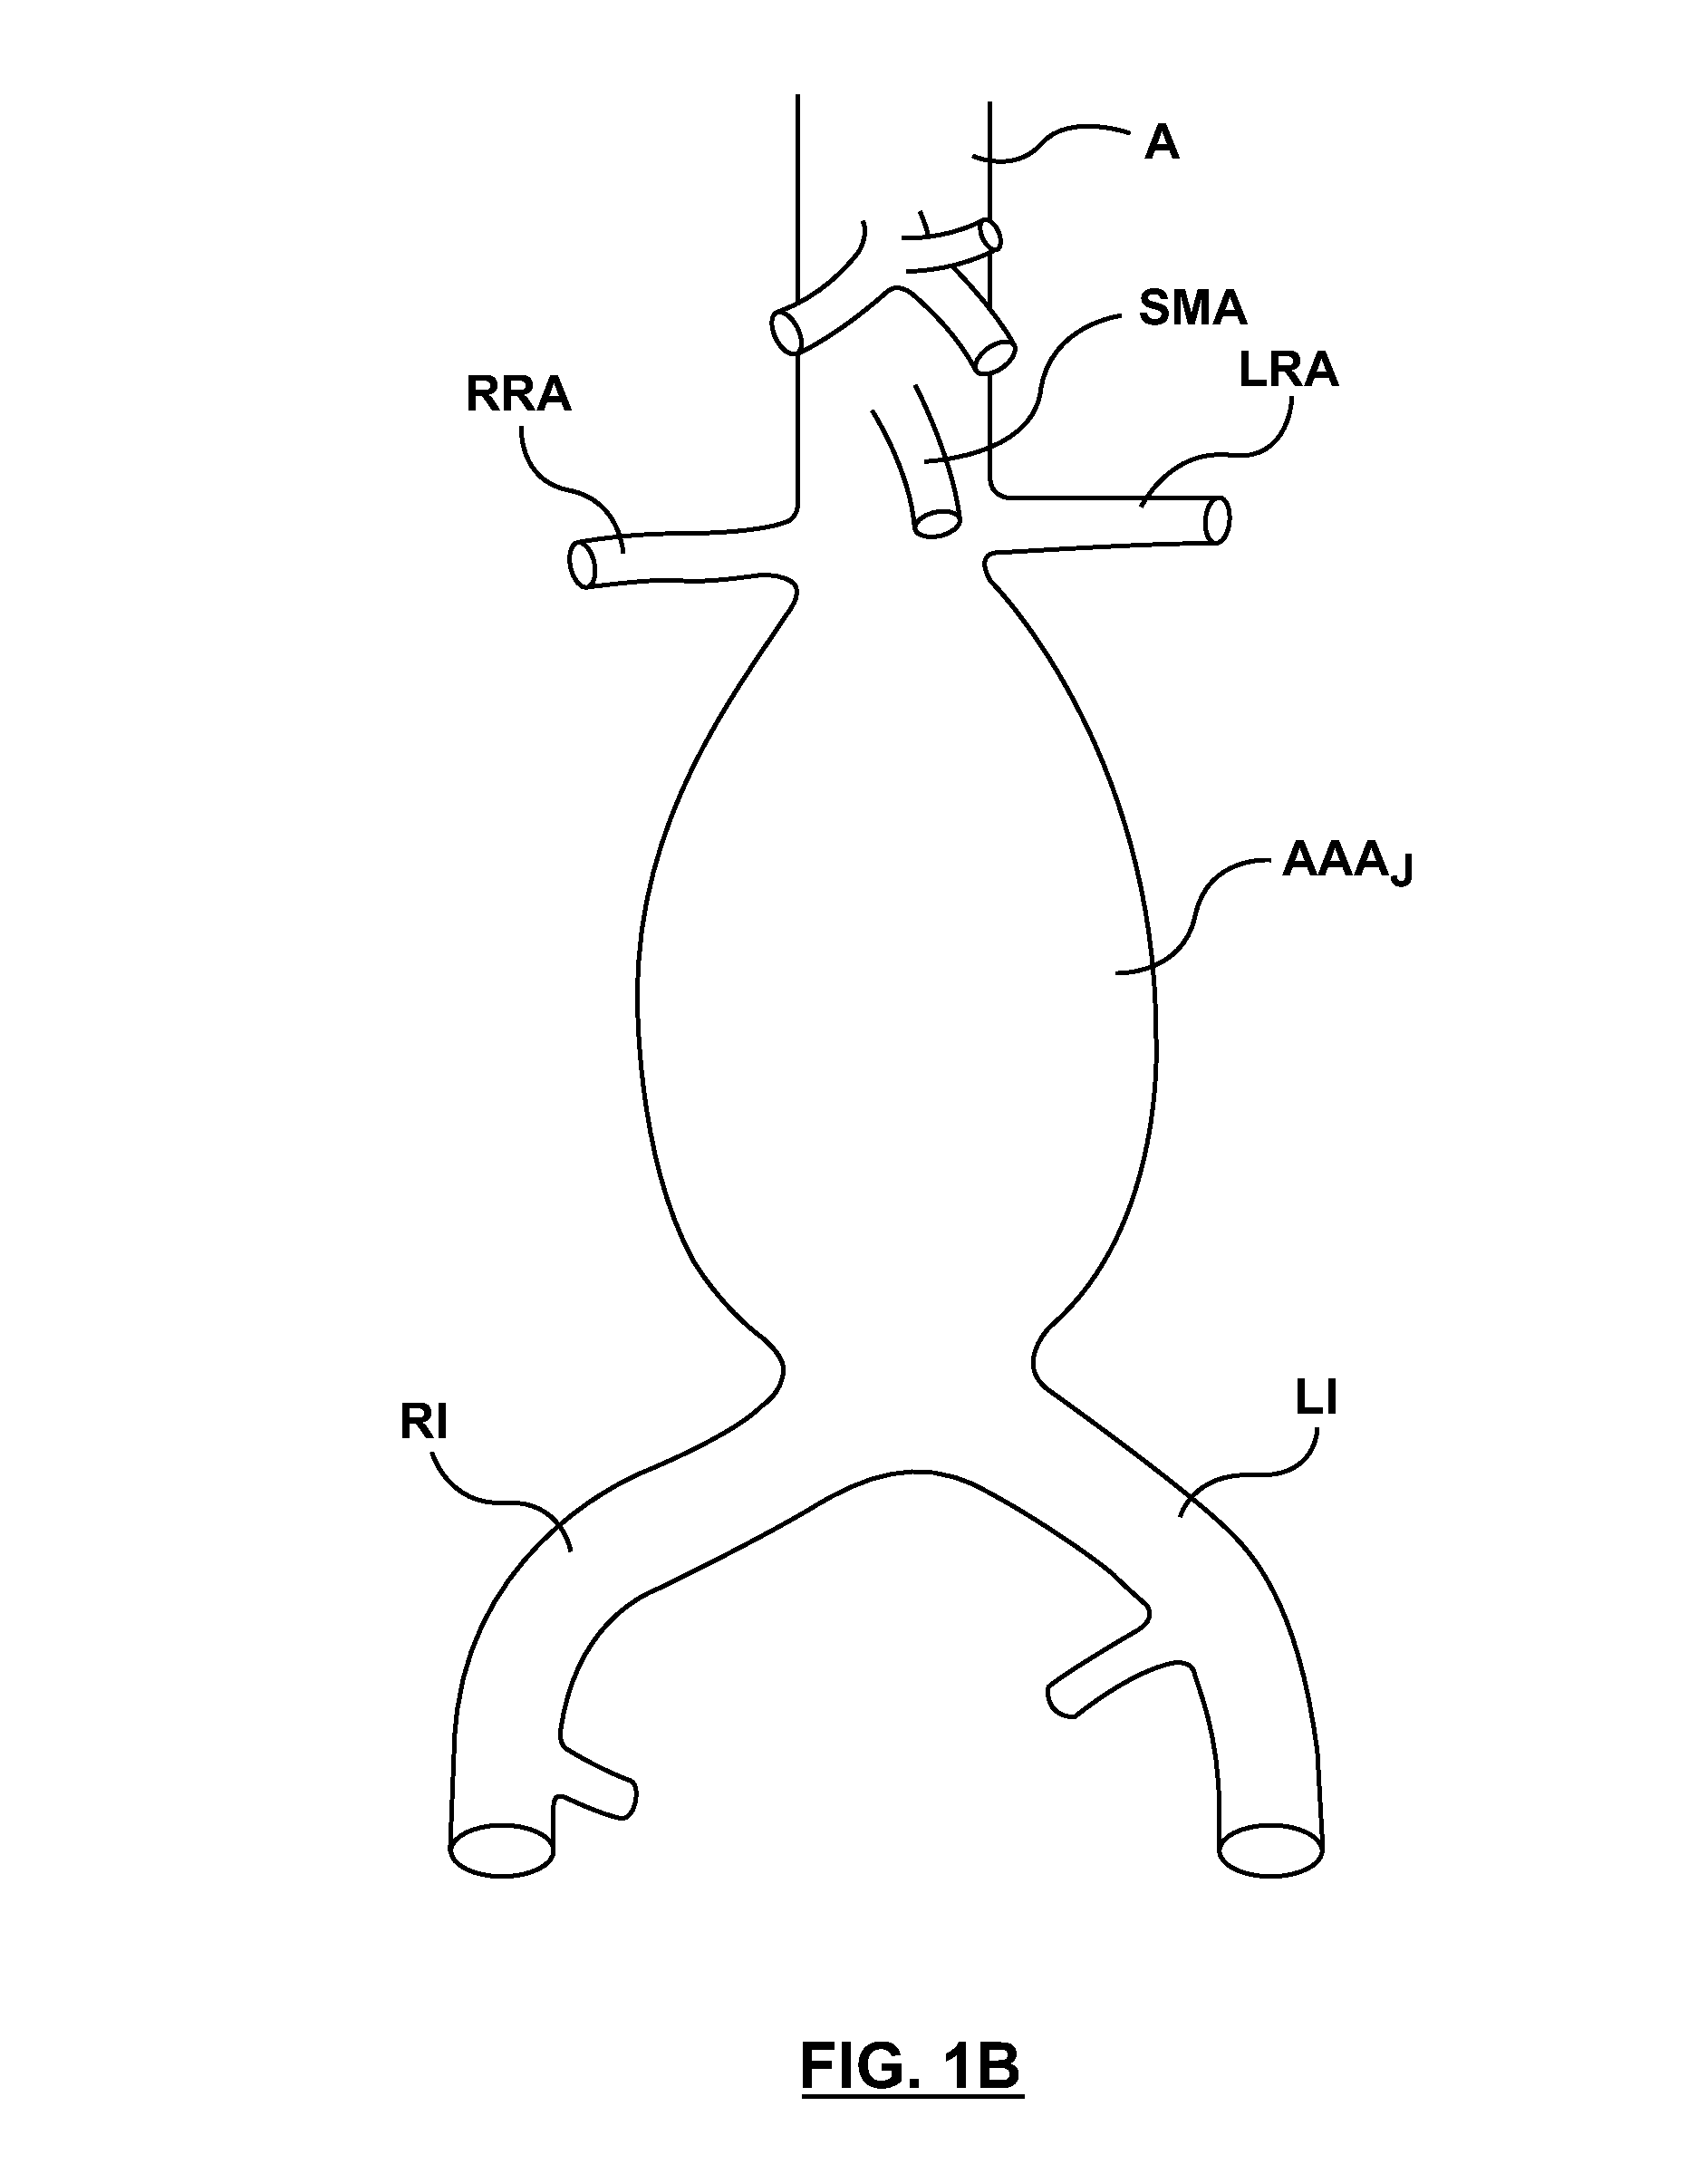 Stent-graft prosthesis for placement in the abdominal aorta